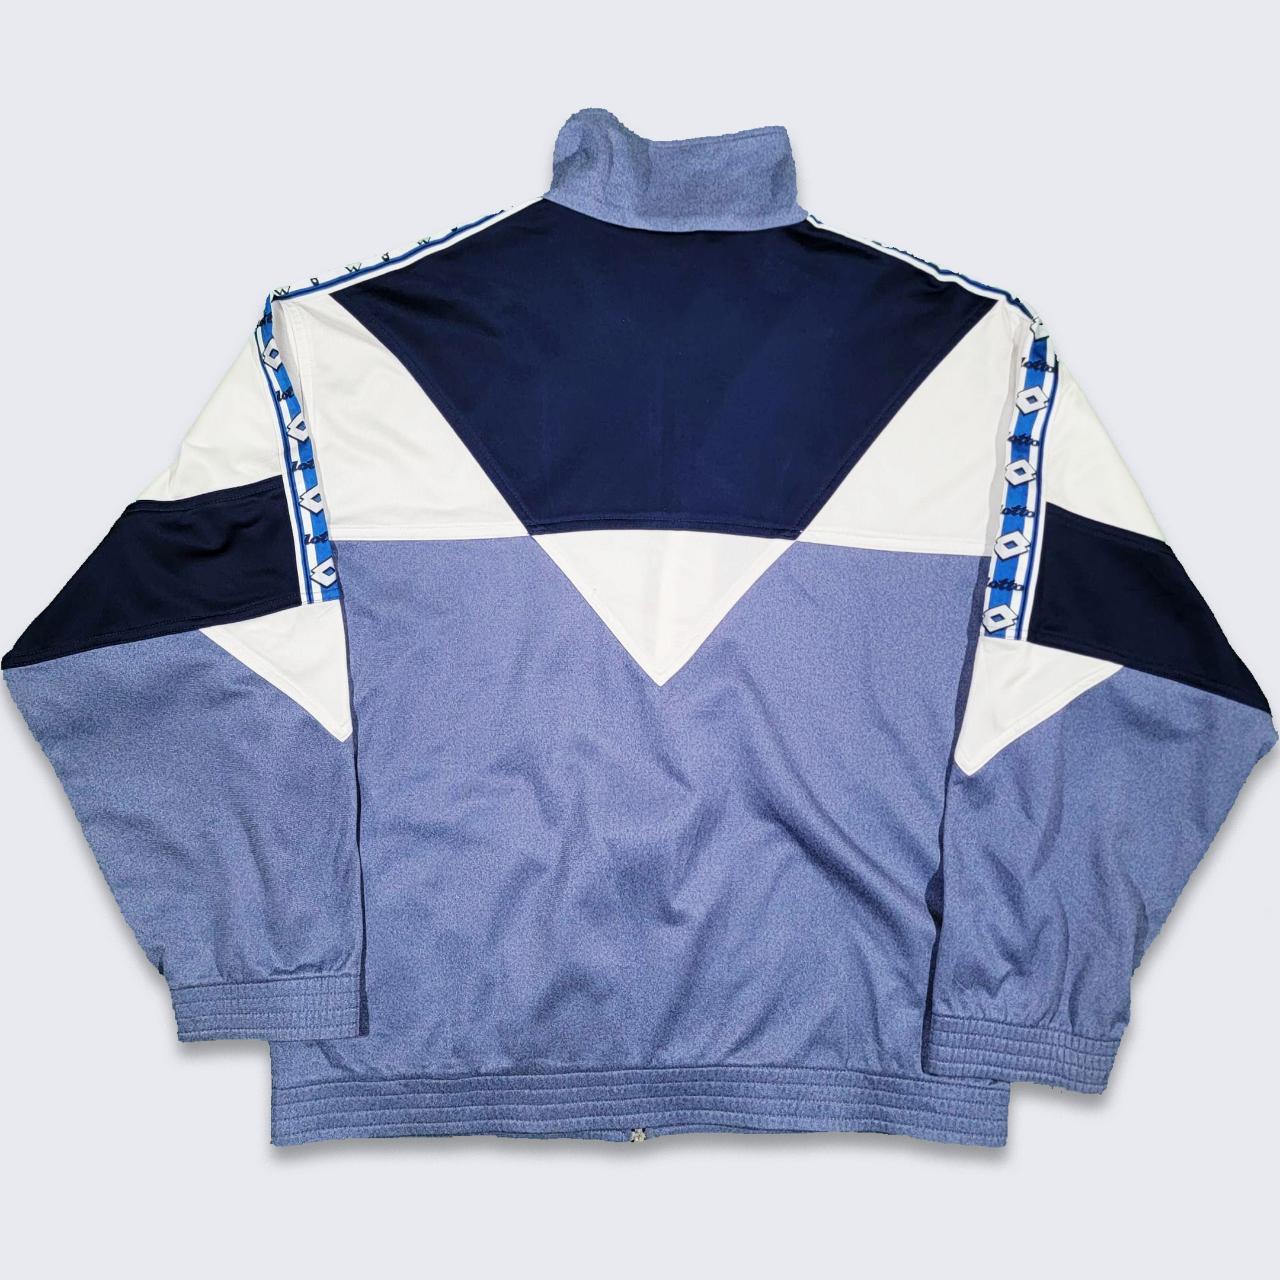 Lotto Men's Grey and Blue Jacket (2)